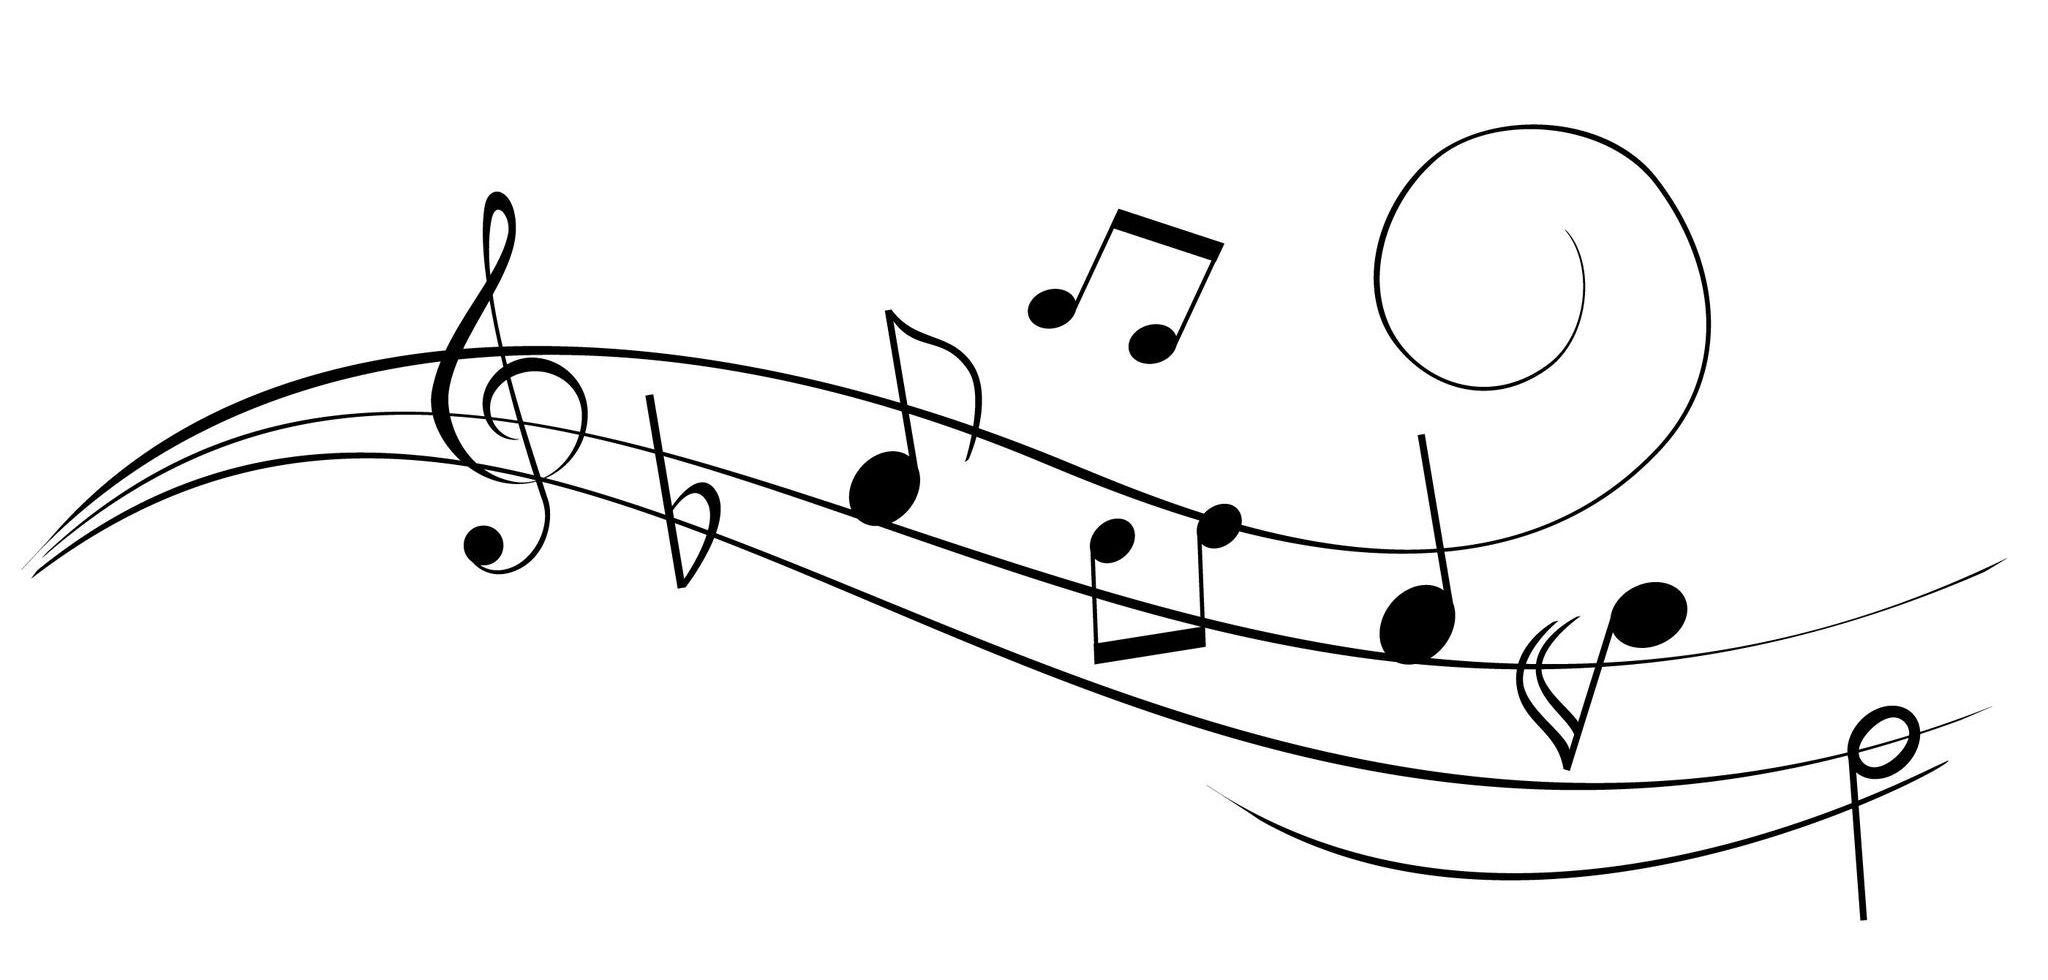 clip art floating music notes - photo #37